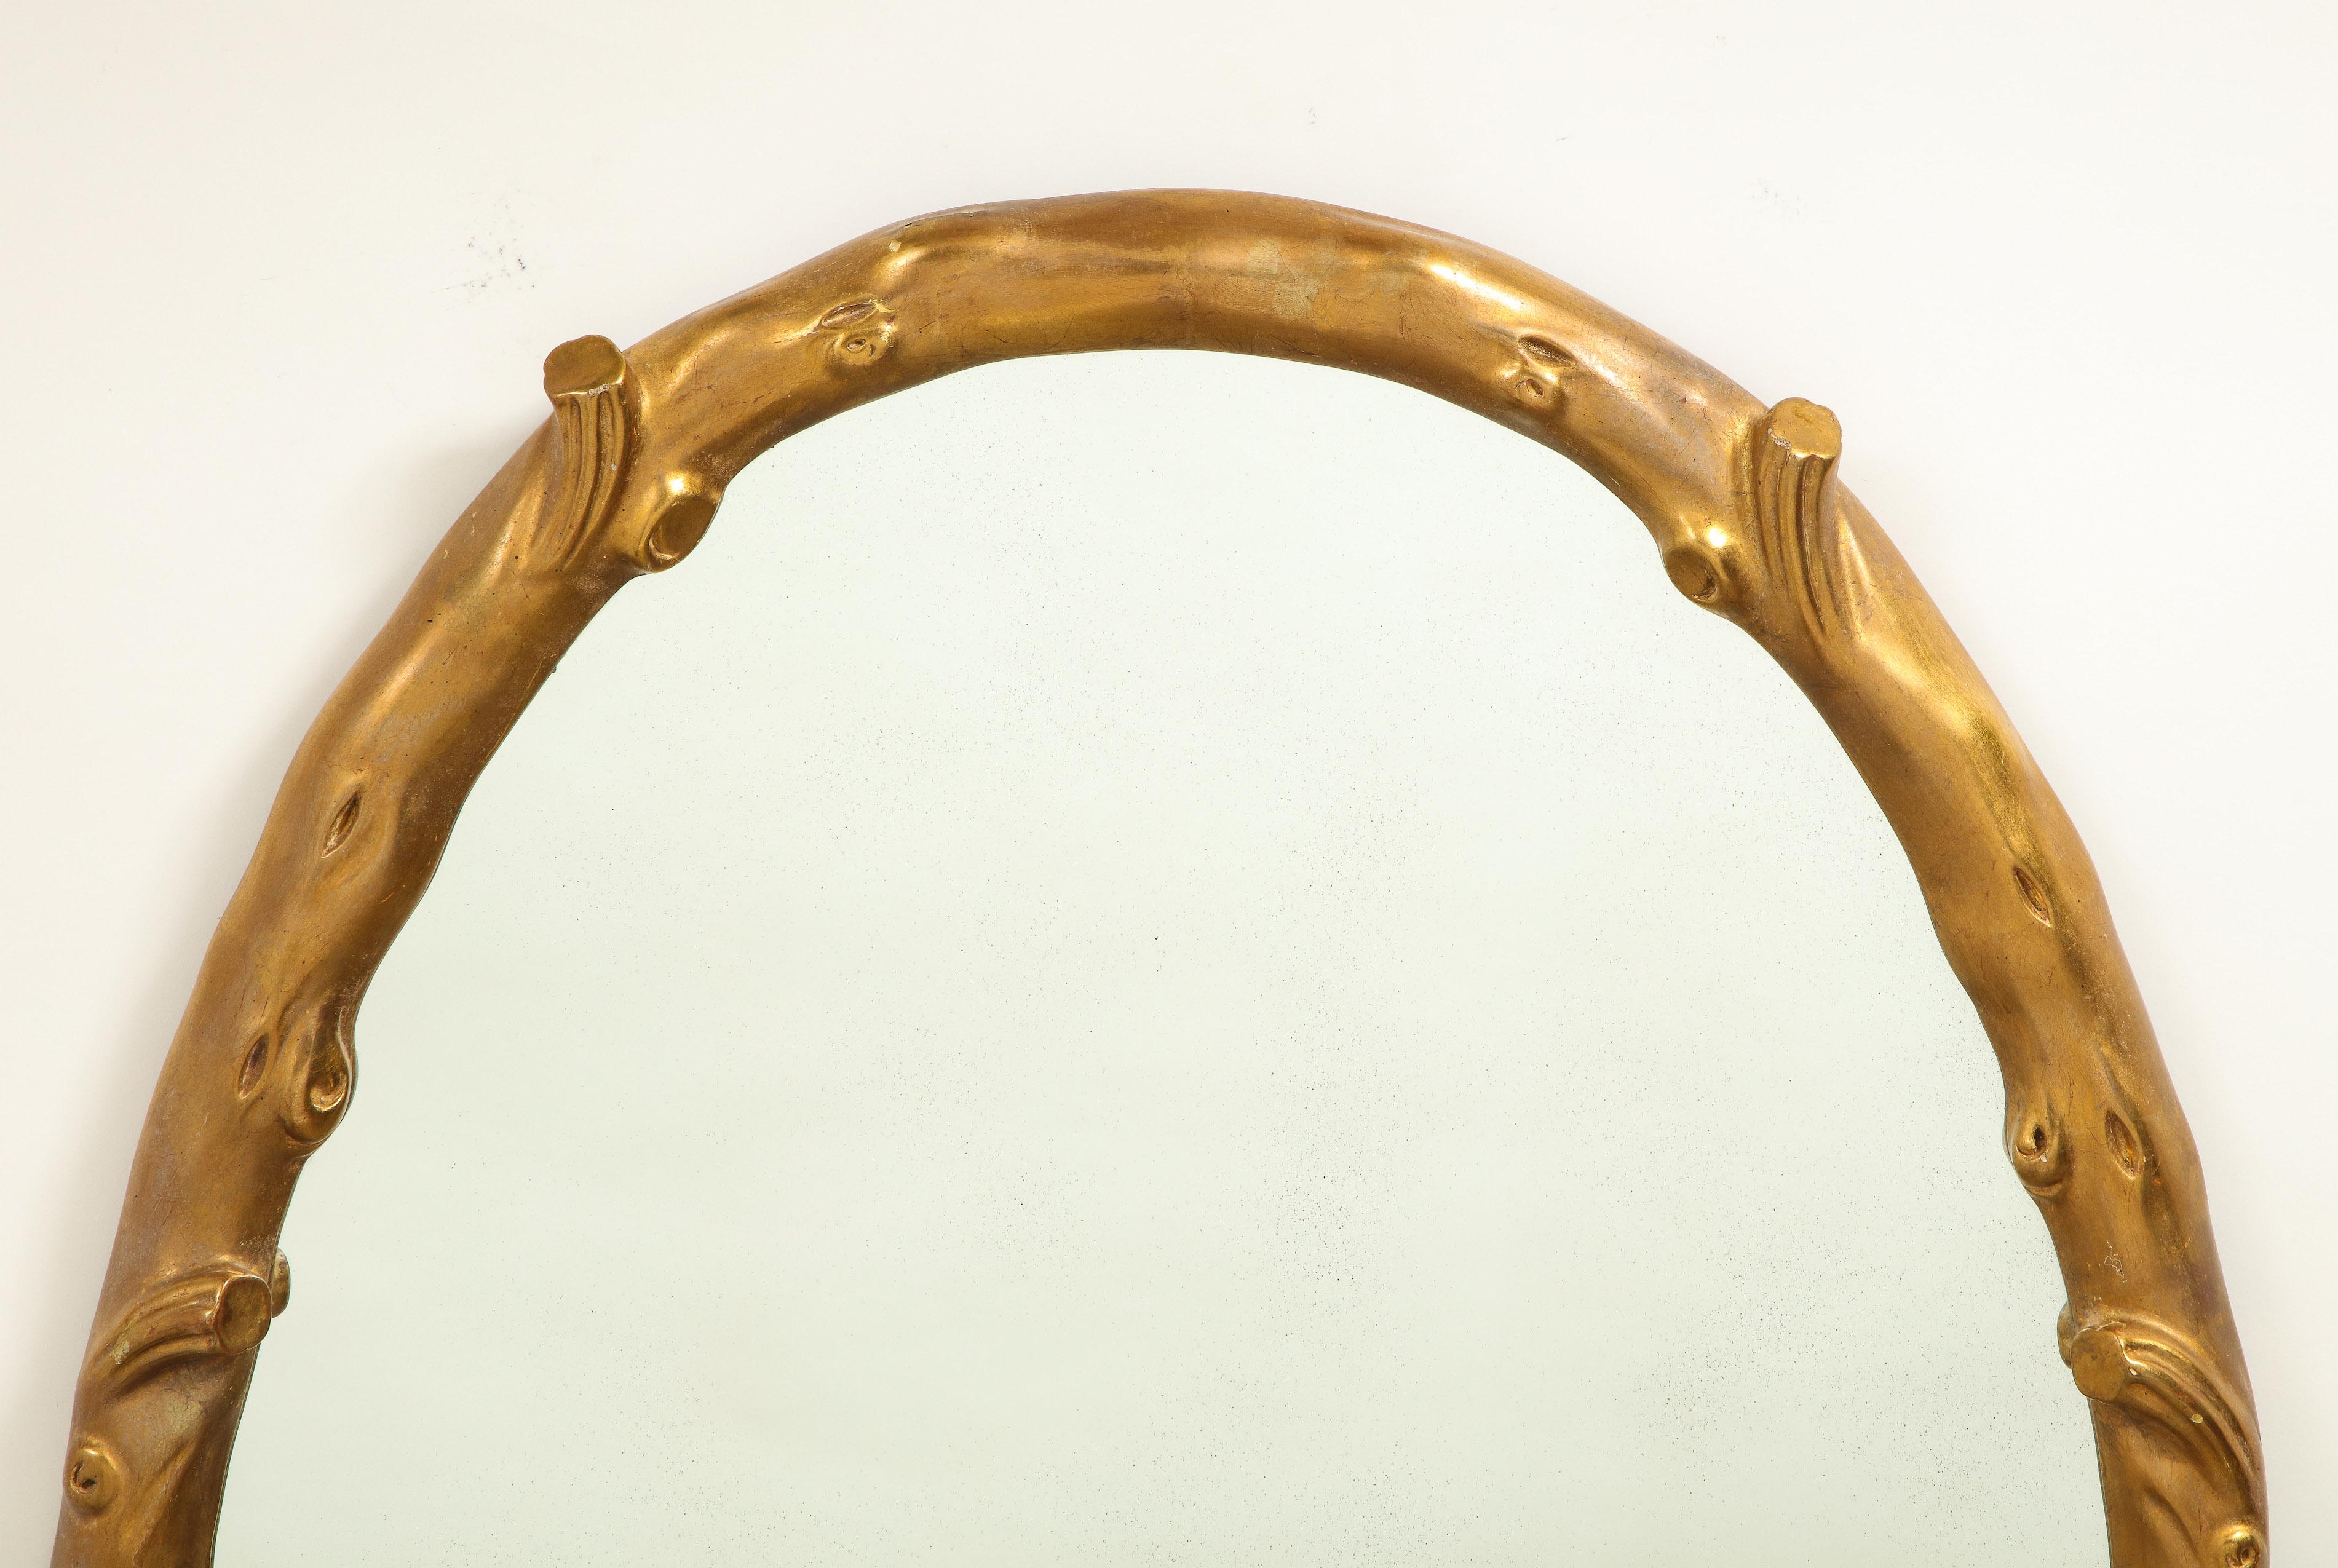 The mirrored plate within a conforming surround fancifully carved to look like a tree branch.